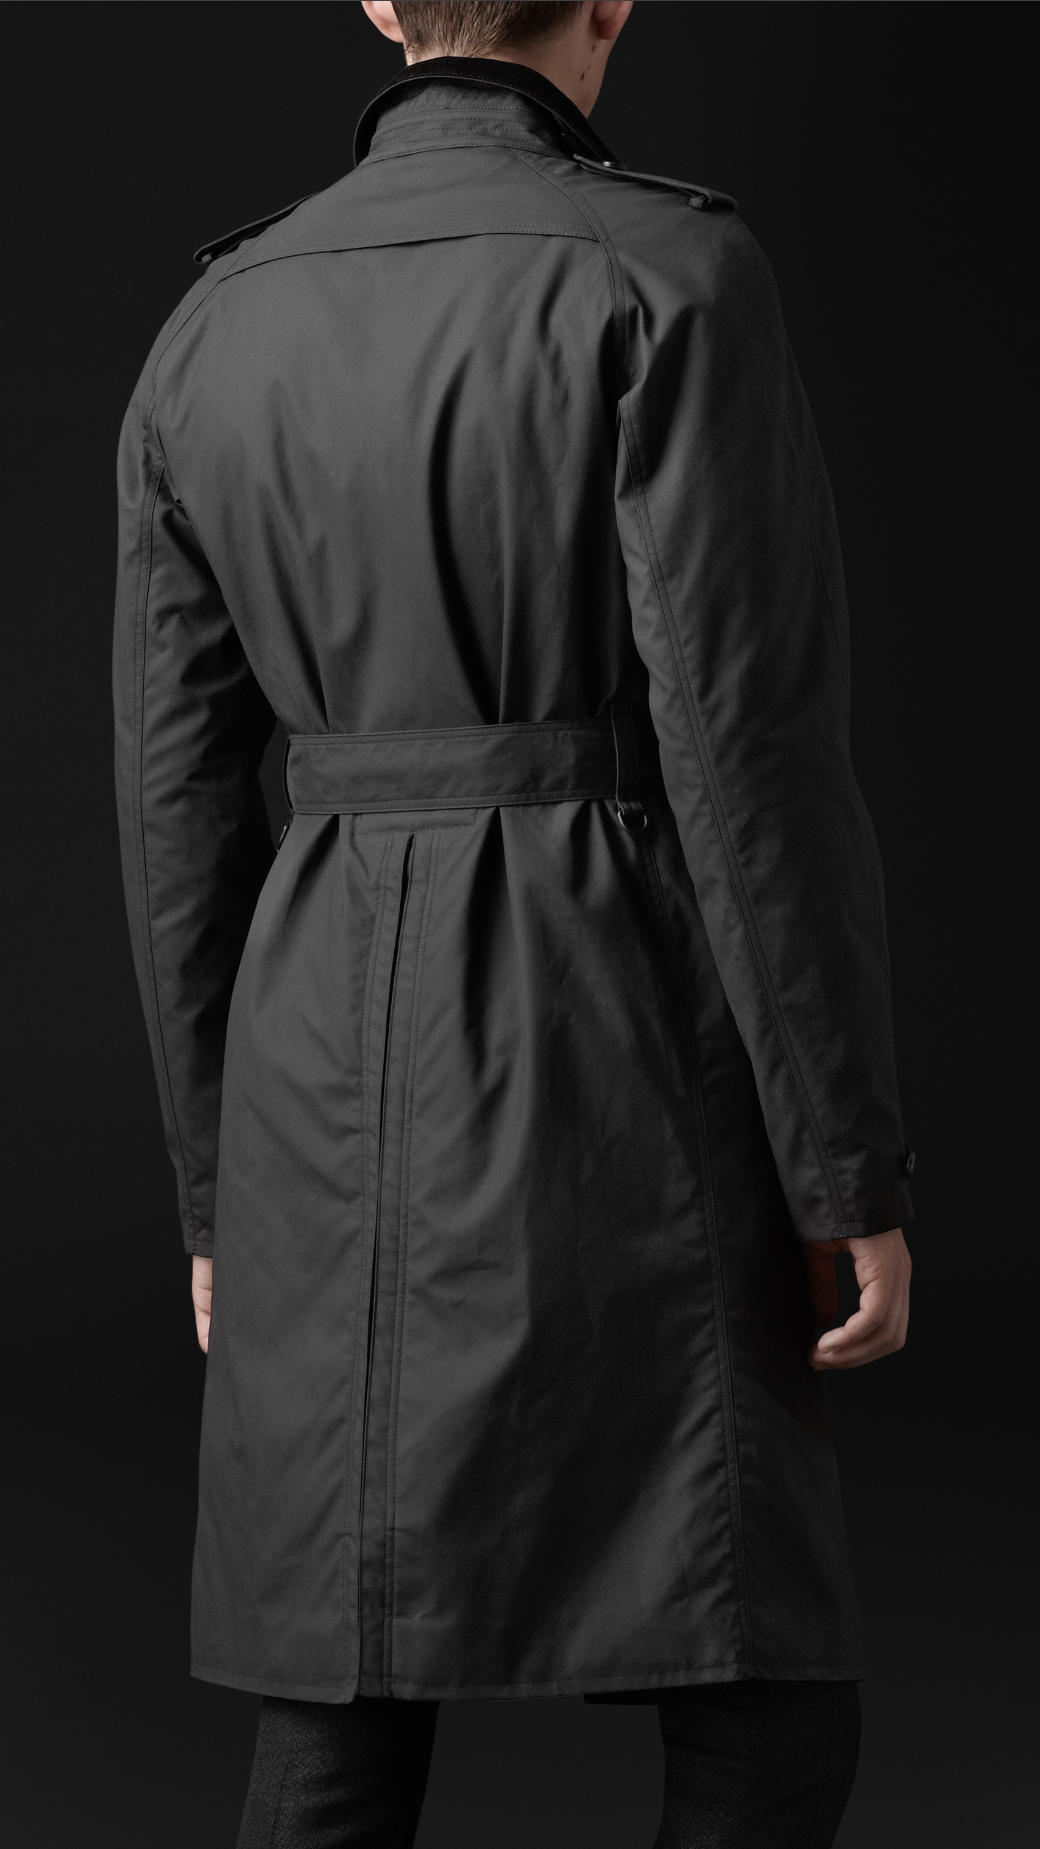 Lyst - Burberry Prorsum Corduroy Collar Waxed Cotton Trench Coat in ...